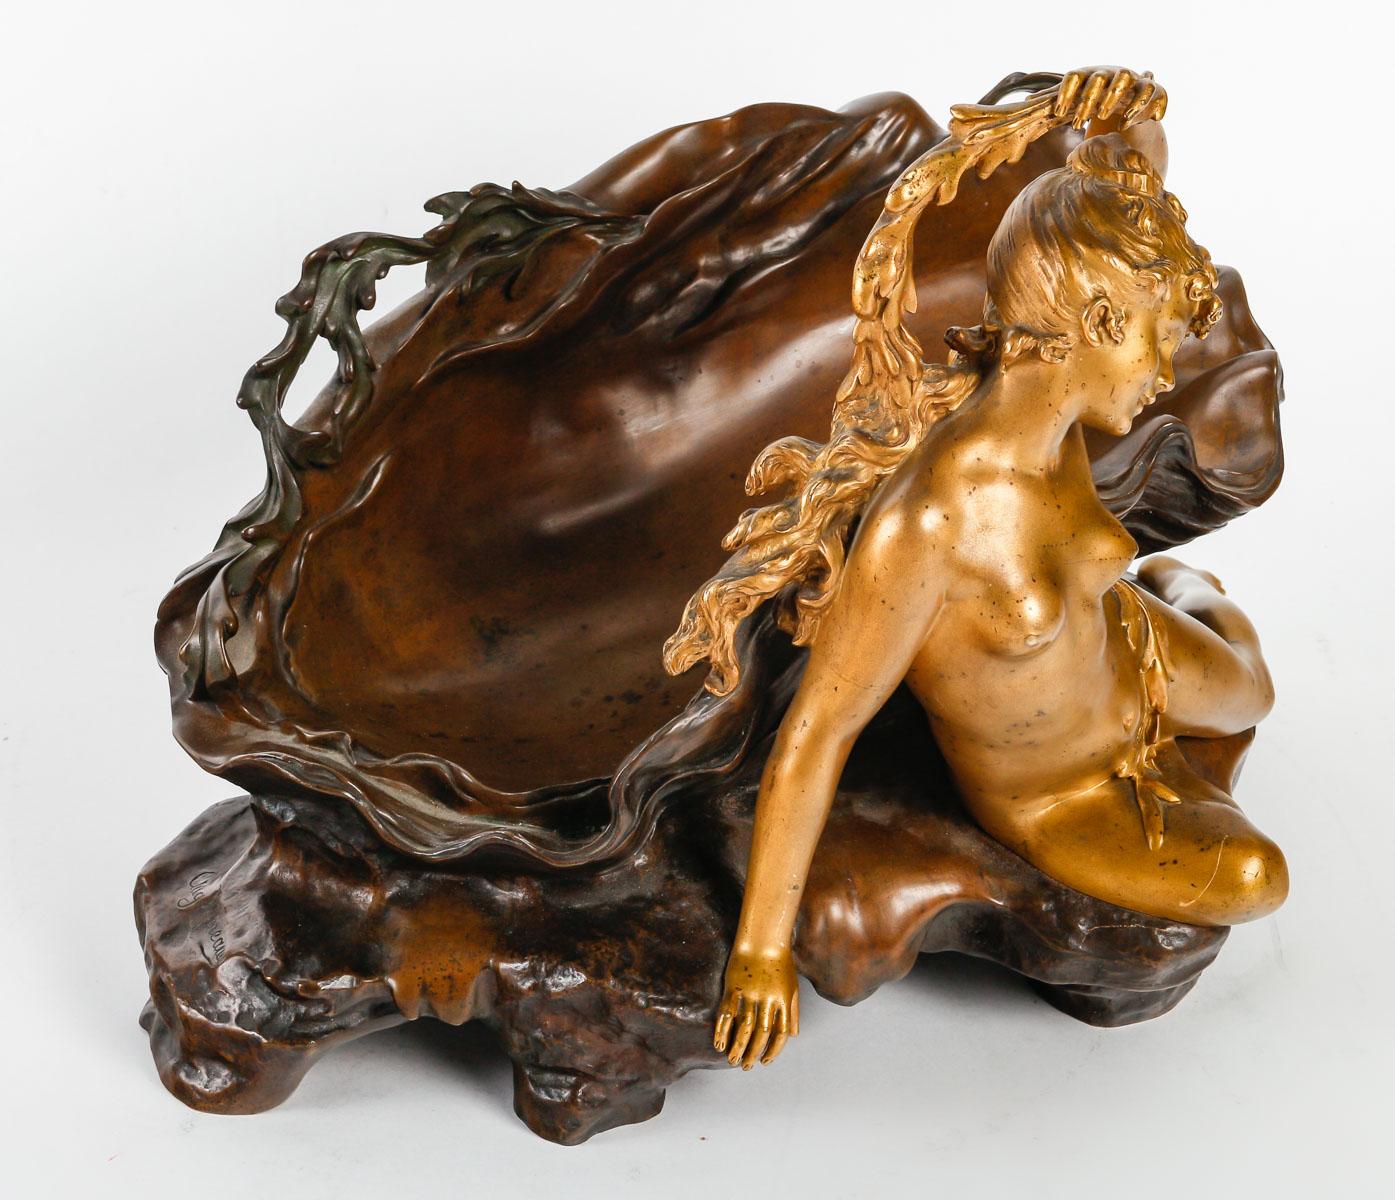 A French Art Nouveau bronze Vide-Poche Centerpiece  
Depicting a Naiad resting by a shell on a rock
Signed Auguste Moreau on the rock
Three patinas
Circa 1900

Auguste Moreau (1834-1917) belongs to the Moreau family, a dynasty of 19th and early 20th